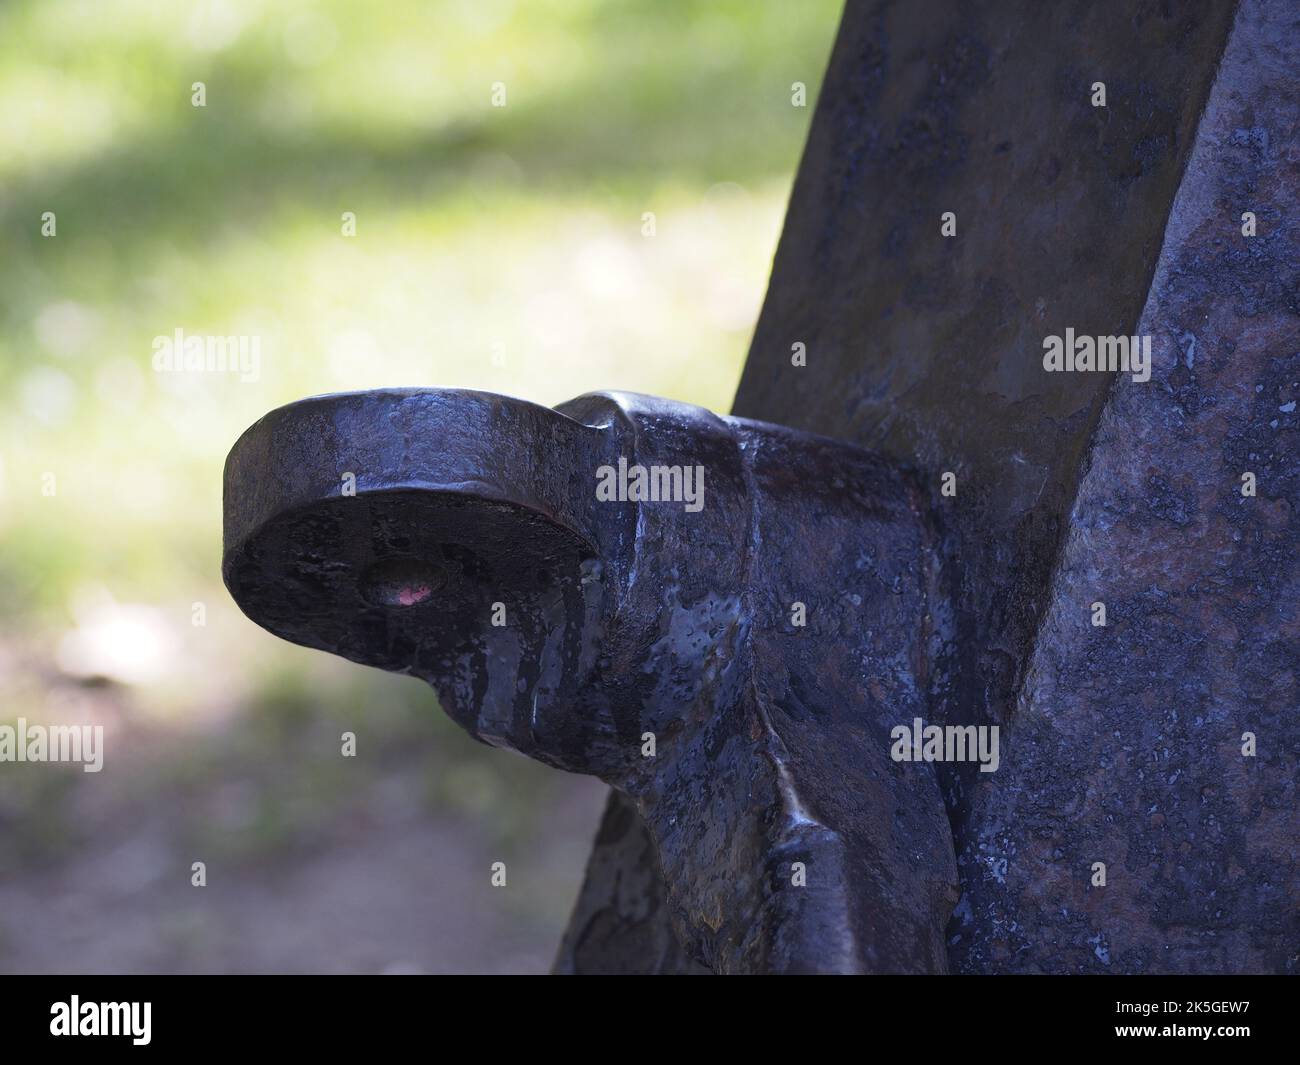 rusted anchor bolt in a public park. Travel and tourism concept Stock Photo